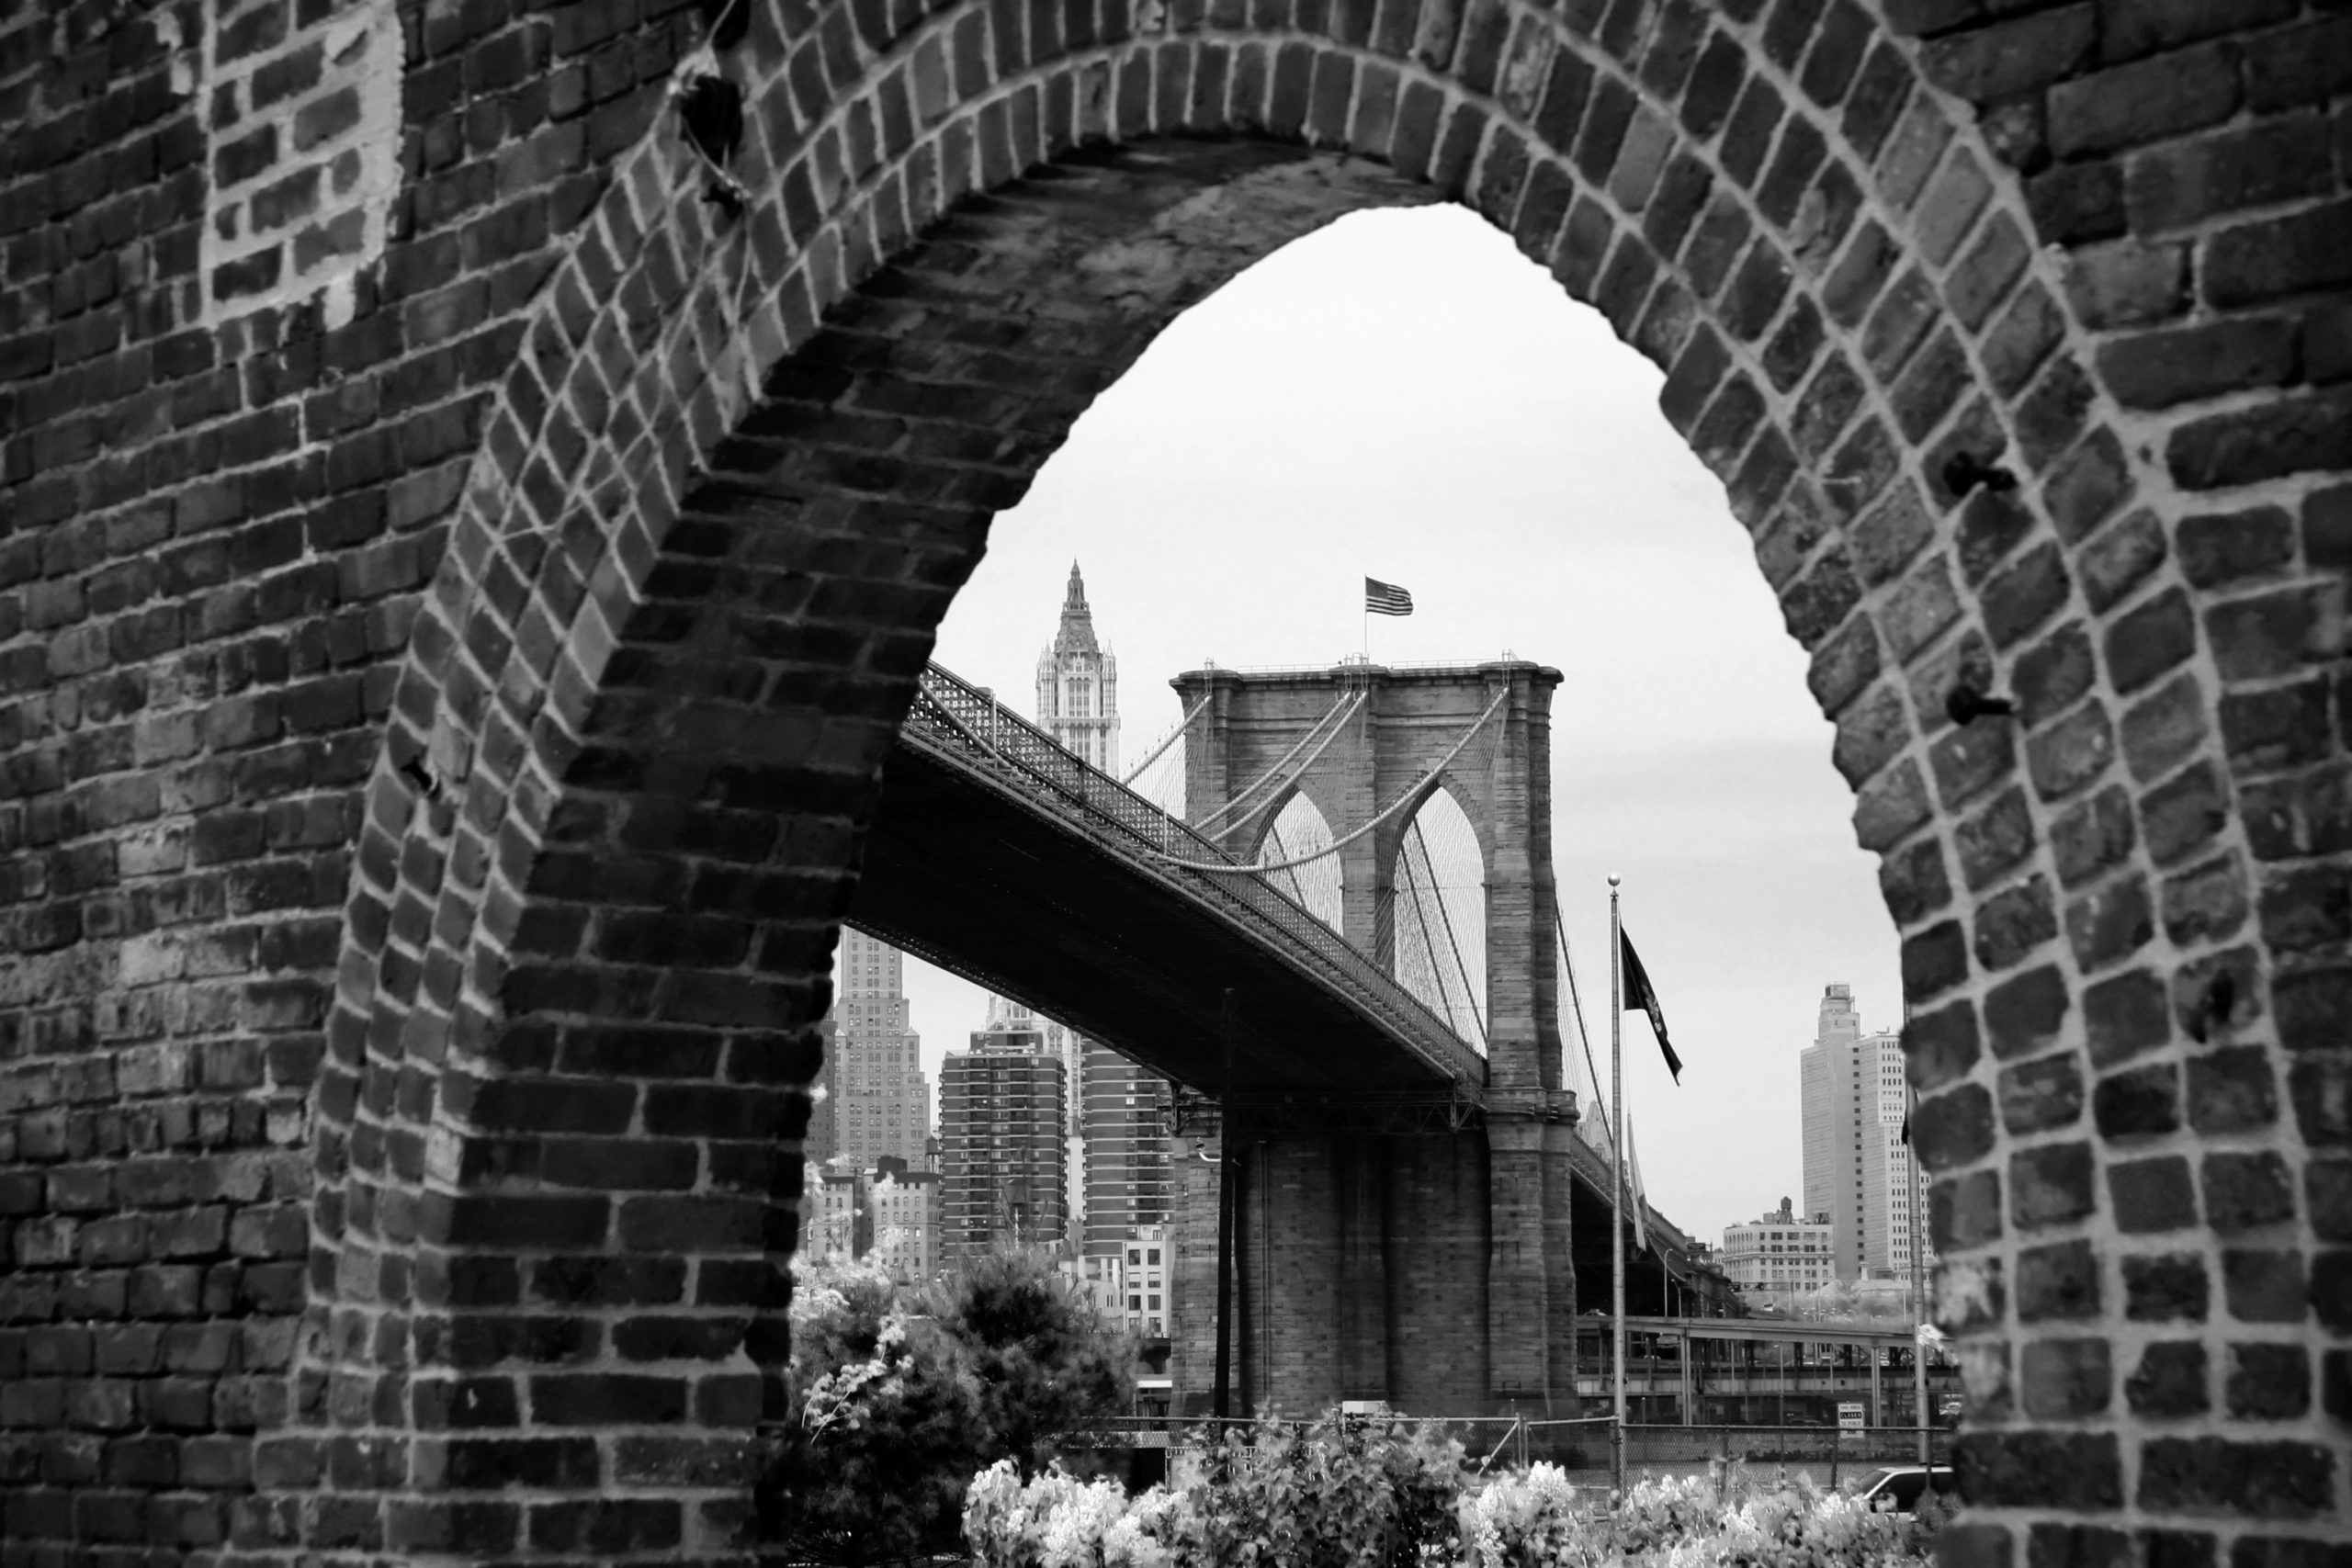 A view of the Brooklyn Bridge through a brick archway. The Dan Englander's Sales Schema is based out of Brooklyn, NY.